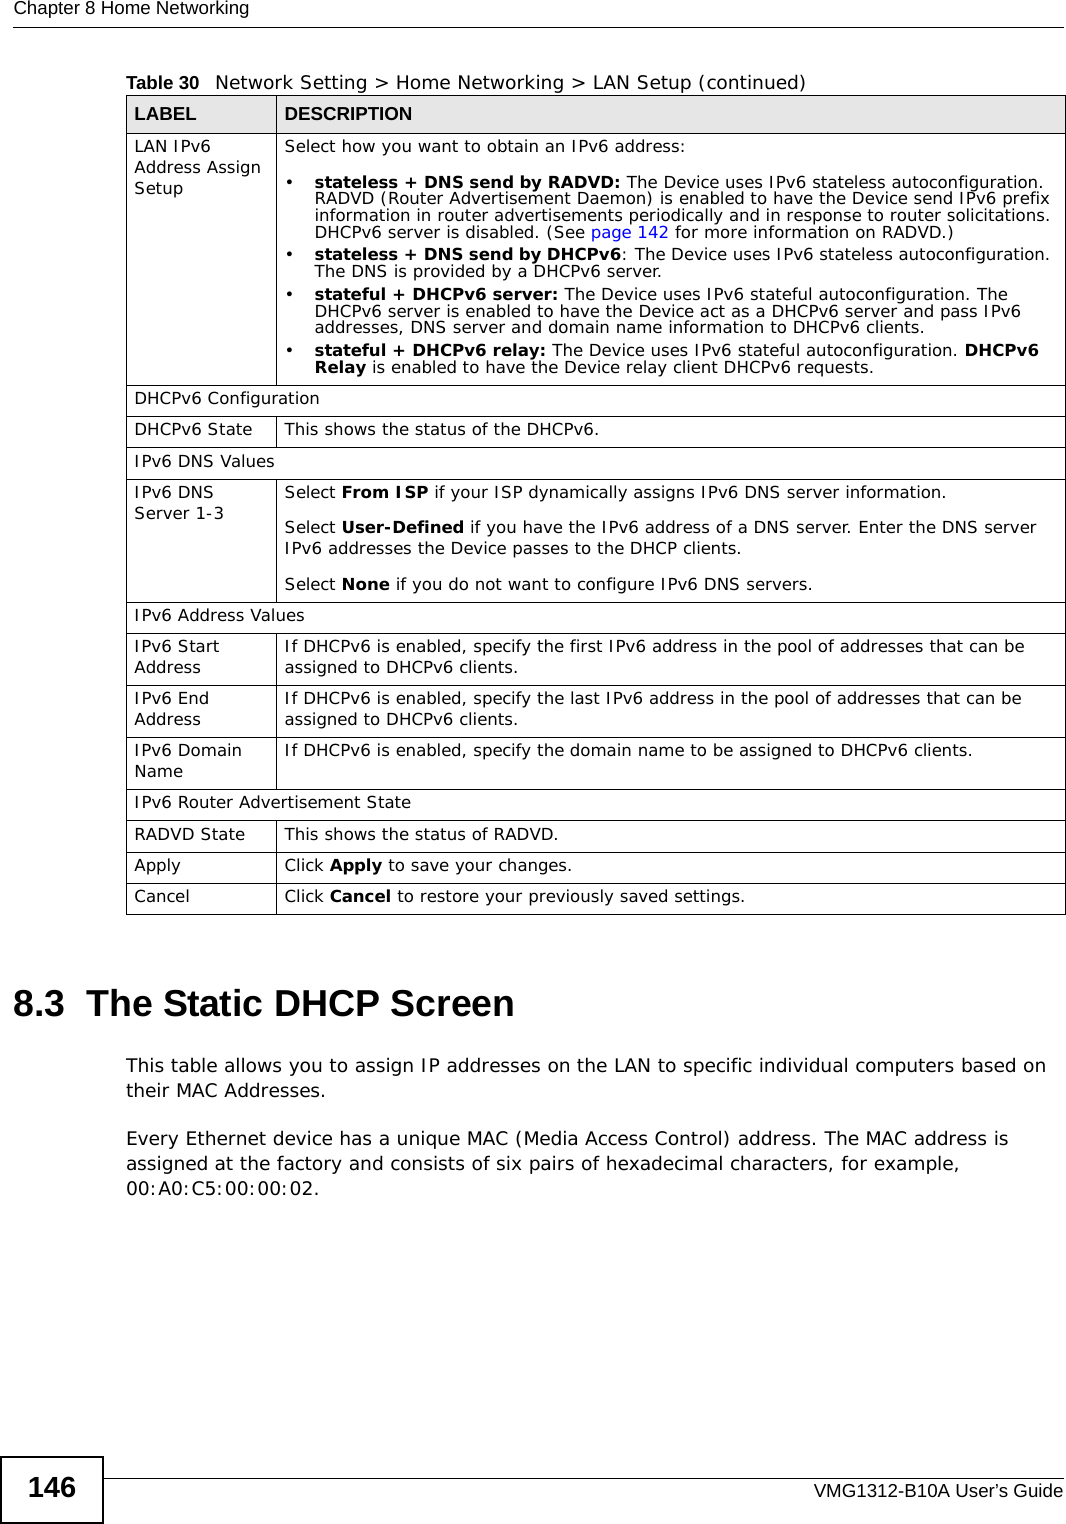 Chapter 8 Home NetworkingVMG1312-B10A User’s Guide1468.3  The Static DHCP ScreenThis table allows you to assign IP addresses on the LAN to specific individual computers based on their MAC Addresses. Every Ethernet device has a unique MAC (Media Access Control) address. The MAC address is assigned at the factory and consists of six pairs of hexadecimal characters, for example, 00:A0:C5:00:00:02.LAN IPv6 Address Assign SetupSelect how you want to obtain an IPv6 address: •stateless + DNS send by RADVD: The Device uses IPv6 stateless autoconfiguration. RADVD (Router Advertisement Daemon) is enabled to have the Device send IPv6 prefix information in router advertisements periodically and in response to router solicitations. DHCPv6 server is disabled. (See page 142 for more information on RADVD.)•stateless + DNS send by DHCPv6: The Device uses IPv6 stateless autoconfiguration. The DNS is provided by a DHCPv6 server.•stateful + DHCPv6 server: The Device uses IPv6 stateful autoconfiguration. The DHCPv6 server is enabled to have the Device act as a DHCPv6 server and pass IPv6 addresses, DNS server and domain name information to DHCPv6 clients.•stateful + DHCPv6 relay: The Device uses IPv6 stateful autoconfiguration. DHCPv6 Relay is enabled to have the Device relay client DHCPv6 requests. DHCPv6 ConfigurationDHCPv6 State  This shows the status of the DHCPv6. IPv6 DNS ValuesIPv6 DNS Server 1-3 Select From ISP if your ISP dynamically assigns IPv6 DNS server information.Select User-Defined if you have the IPv6 address of a DNS server. Enter the DNS server IPv6 addresses the Device passes to the DHCP clients.Select None if you do not want to configure IPv6 DNS servers.IPv6 Address ValuesIPv6 Start Address If DHCPv6 is enabled, specify the first IPv6 address in the pool of addresses that can be assigned to DHCPv6 clients. IPv6 End Address If DHCPv6 is enabled, specify the last IPv6 address in the pool of addresses that can be assigned to DHCPv6 clients. IPv6 Domain Name  If DHCPv6 is enabled, specify the domain name to be assigned to DHCPv6 clients.IPv6 Router Advertisement StateRADVD State  This shows the status of RADVD.Apply Click Apply to save your changes.Cancel Click Cancel to restore your previously saved settings.Table 30   Network Setting &gt; Home Networking &gt; LAN Setup (continued)LABEL DESCRIPTION